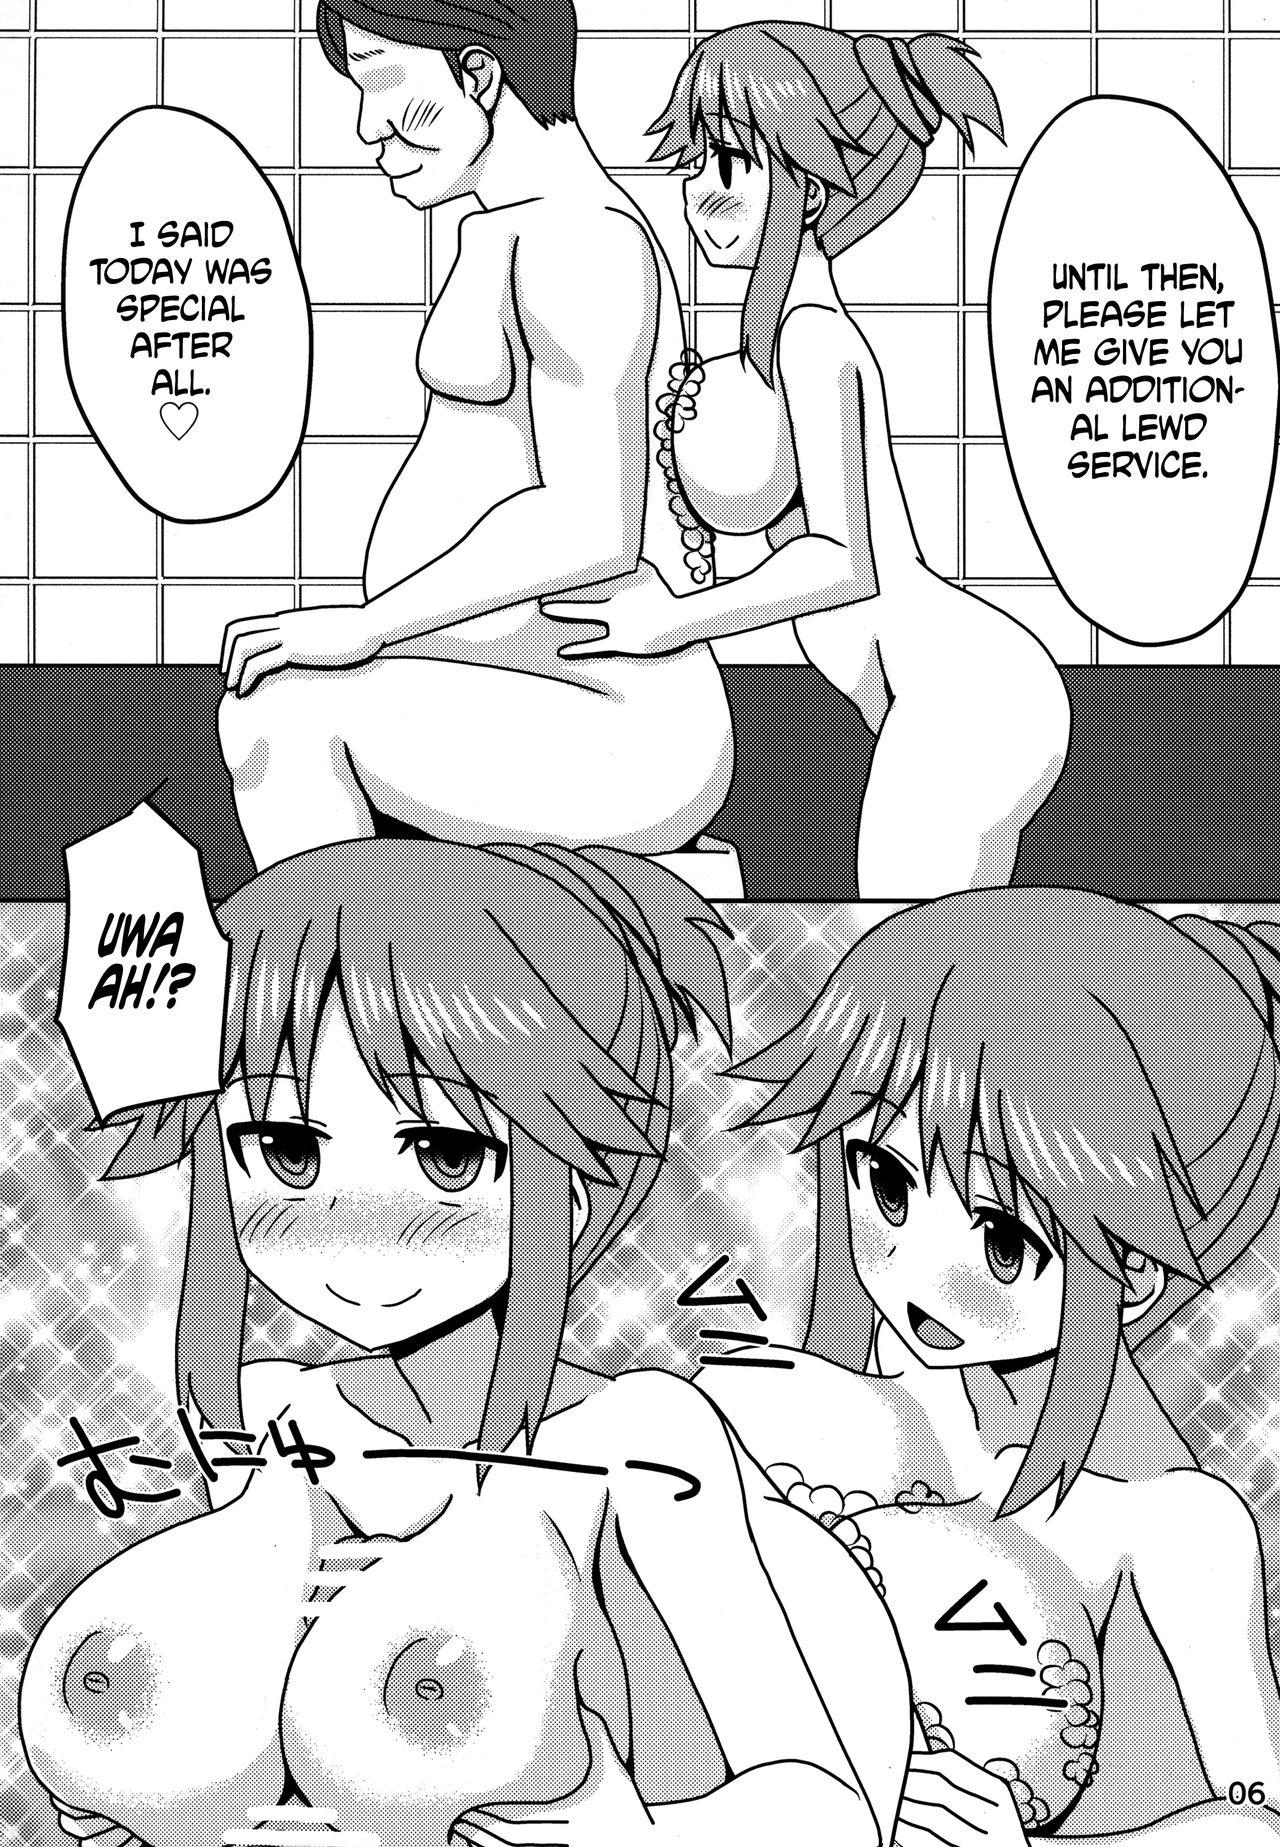 Unshaved (C92) [Copo DELUXE (Copo Copo)] Blue Nee-san to Ichaicha Suru Hon | A Book About Making out with Blue-neesan (Pokémon) [English] [EHCOVE] - Pokemon Trimmed - Page 5